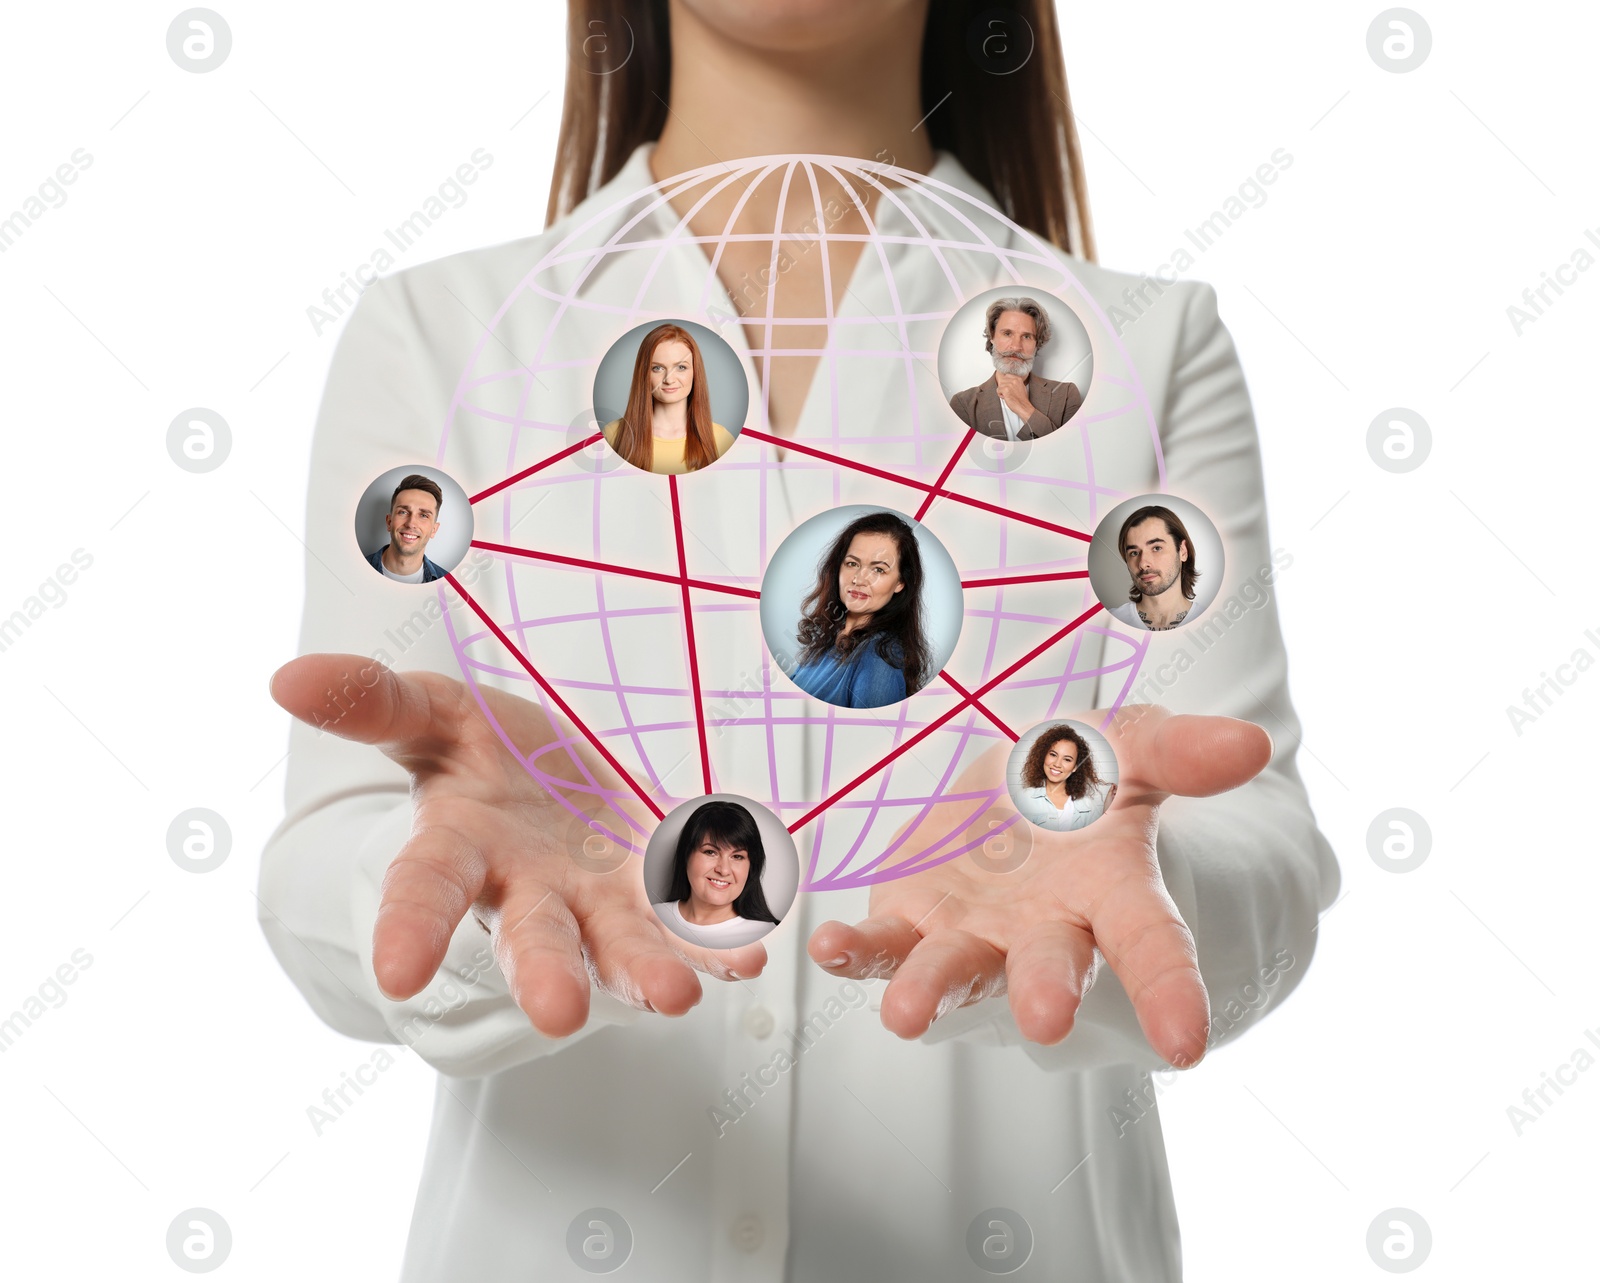 Image of Woman holding globe illustration with scheme of avatars linked together as network on white background, closeup